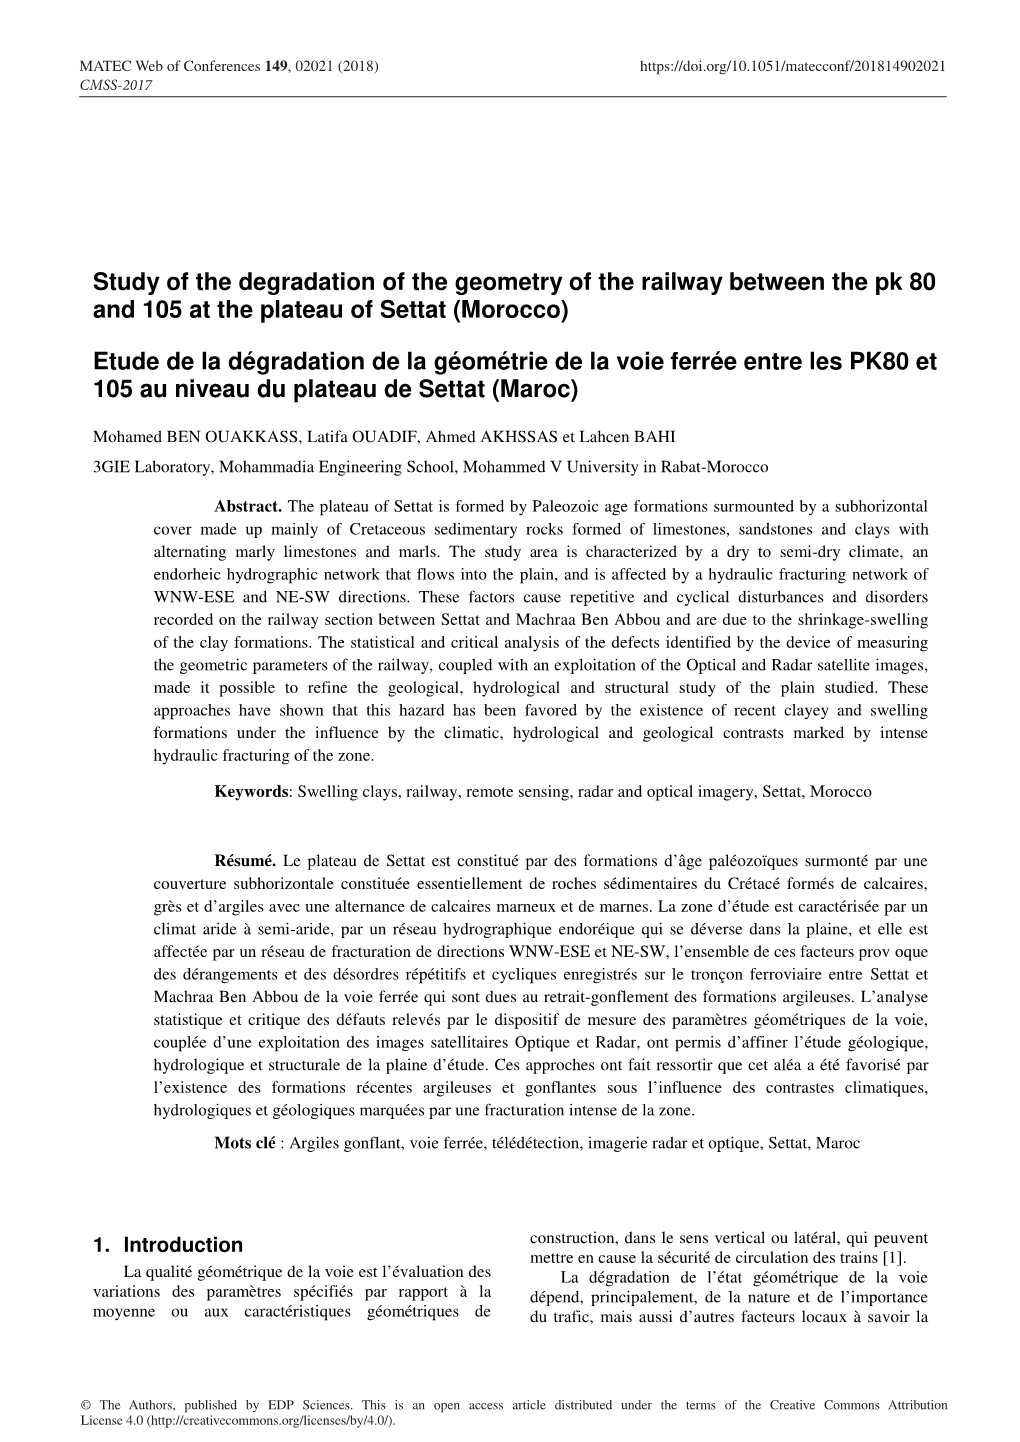 Study of the Degradation of the Geometry of the Railway Between the Pk 80 and 105 at the Plateau of Settat (Morocco)